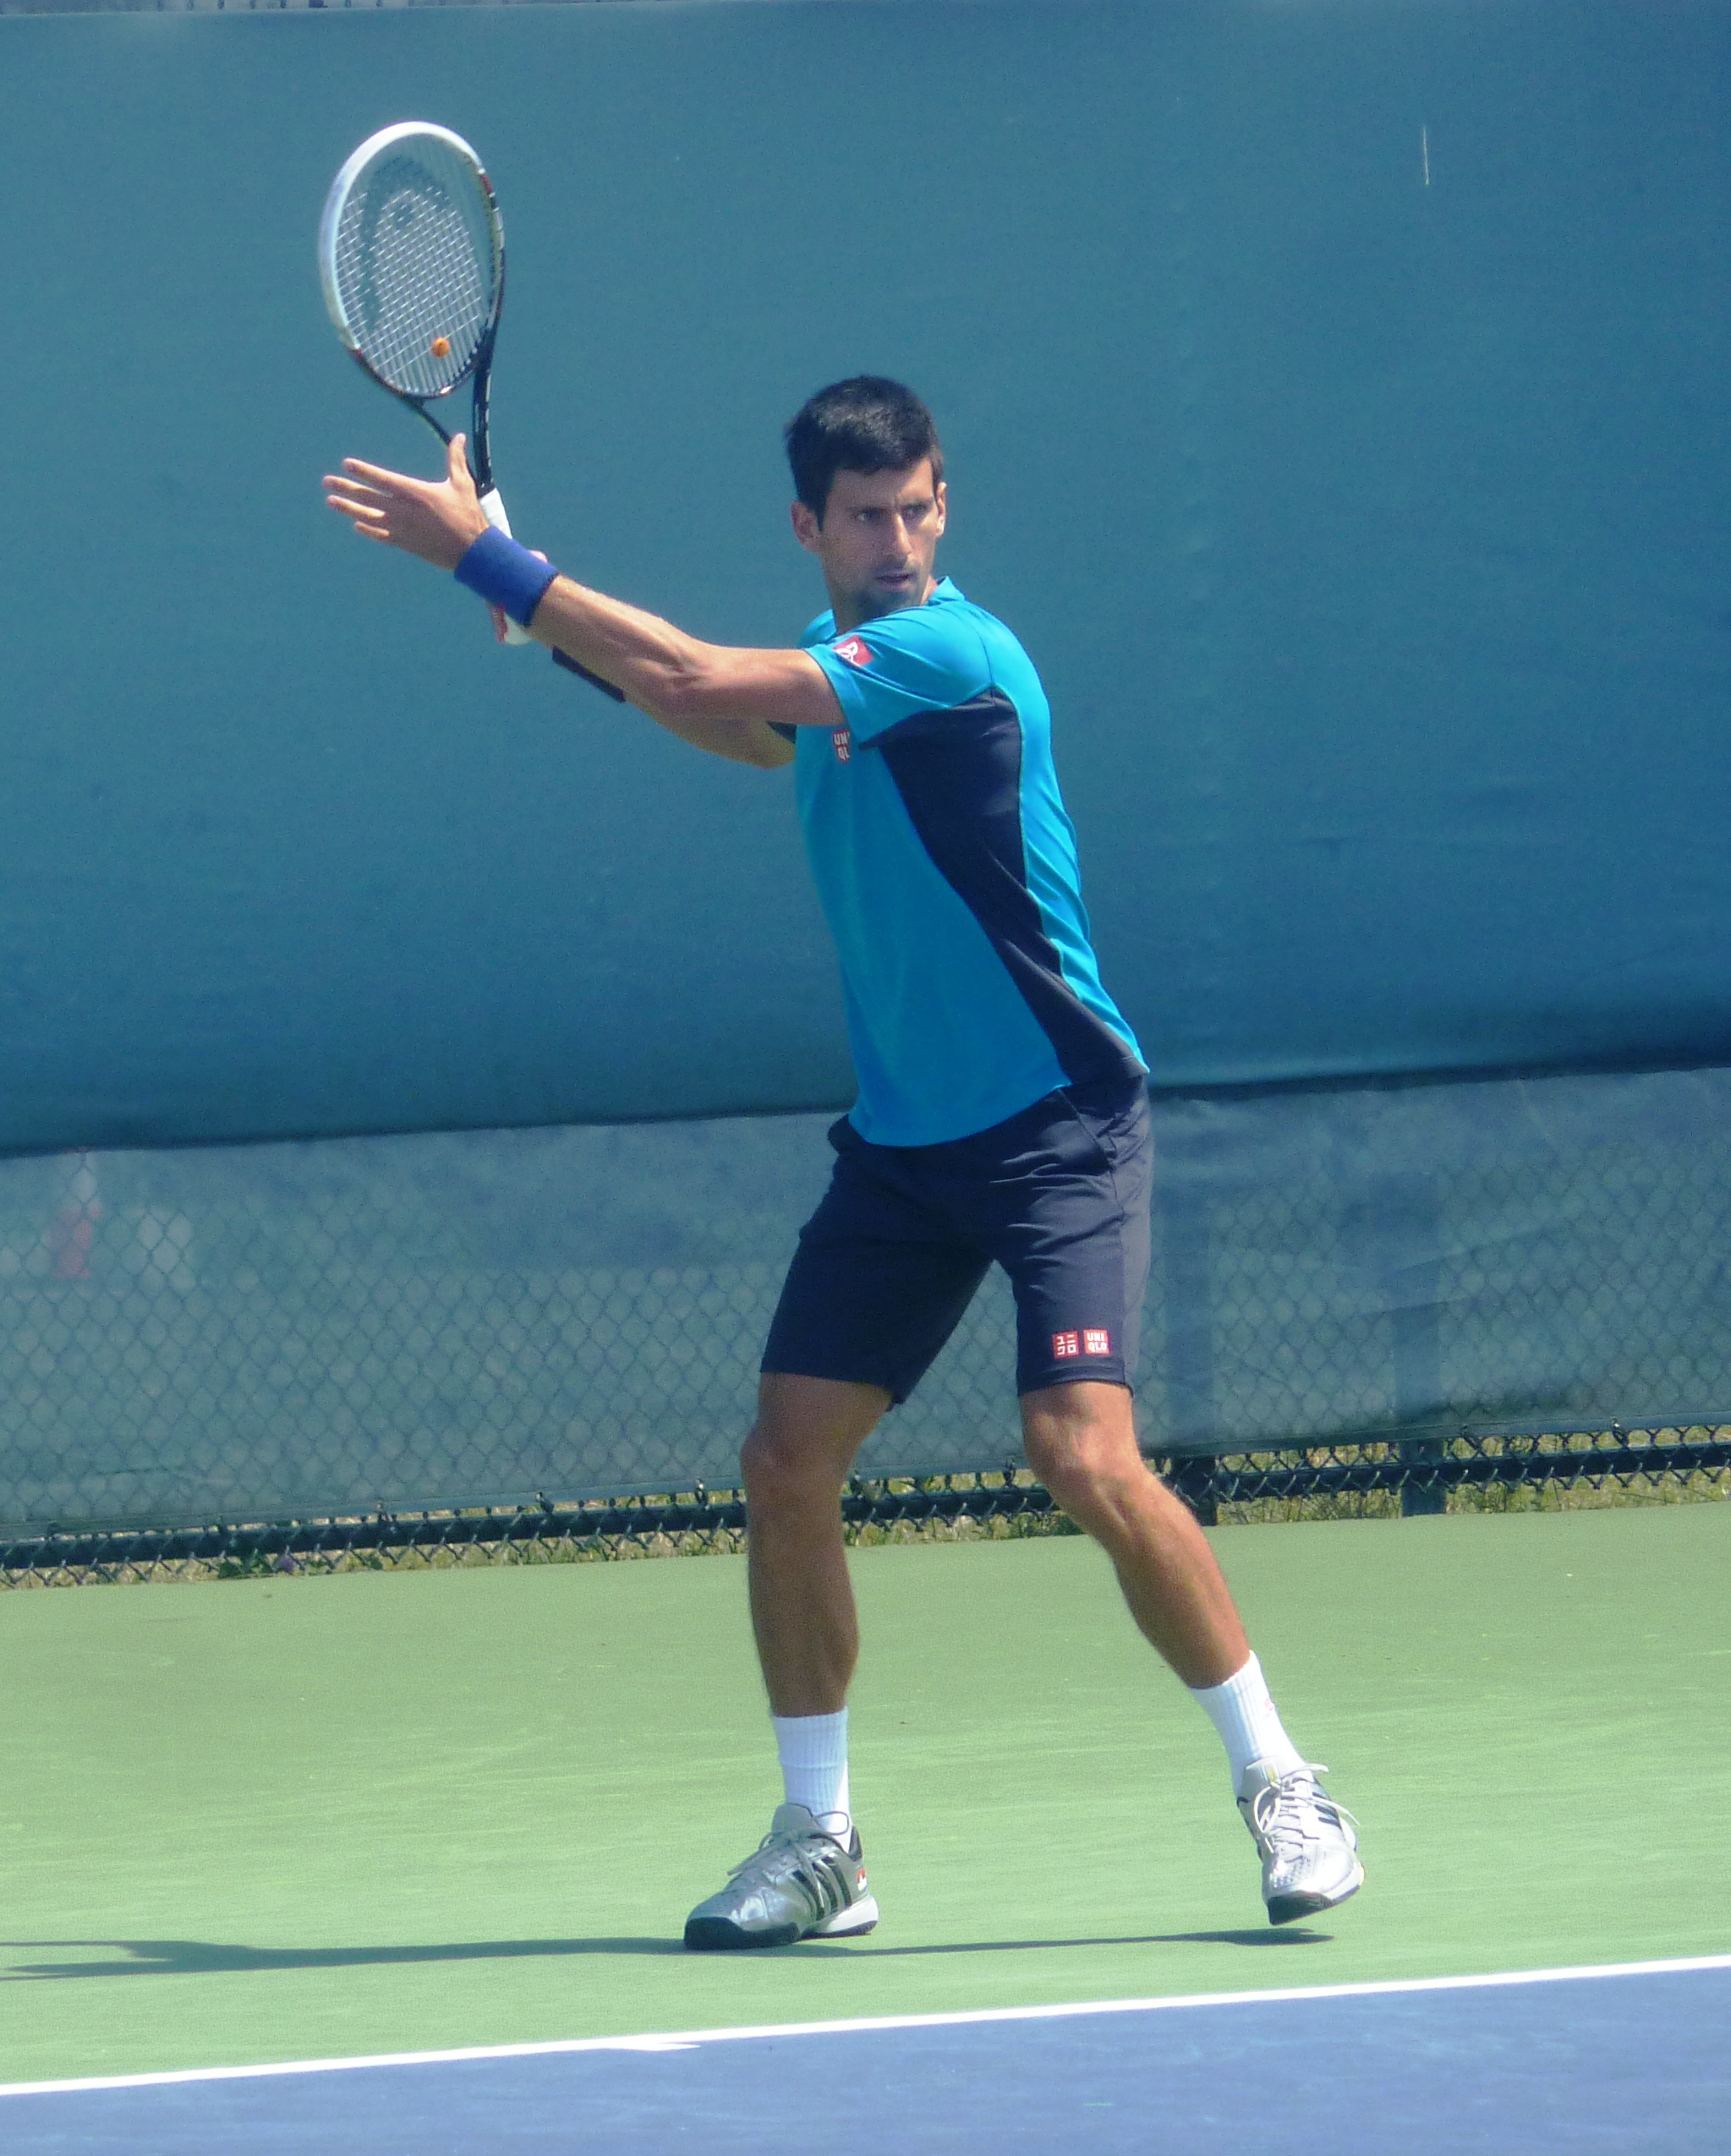 Djokovic warming up for his match